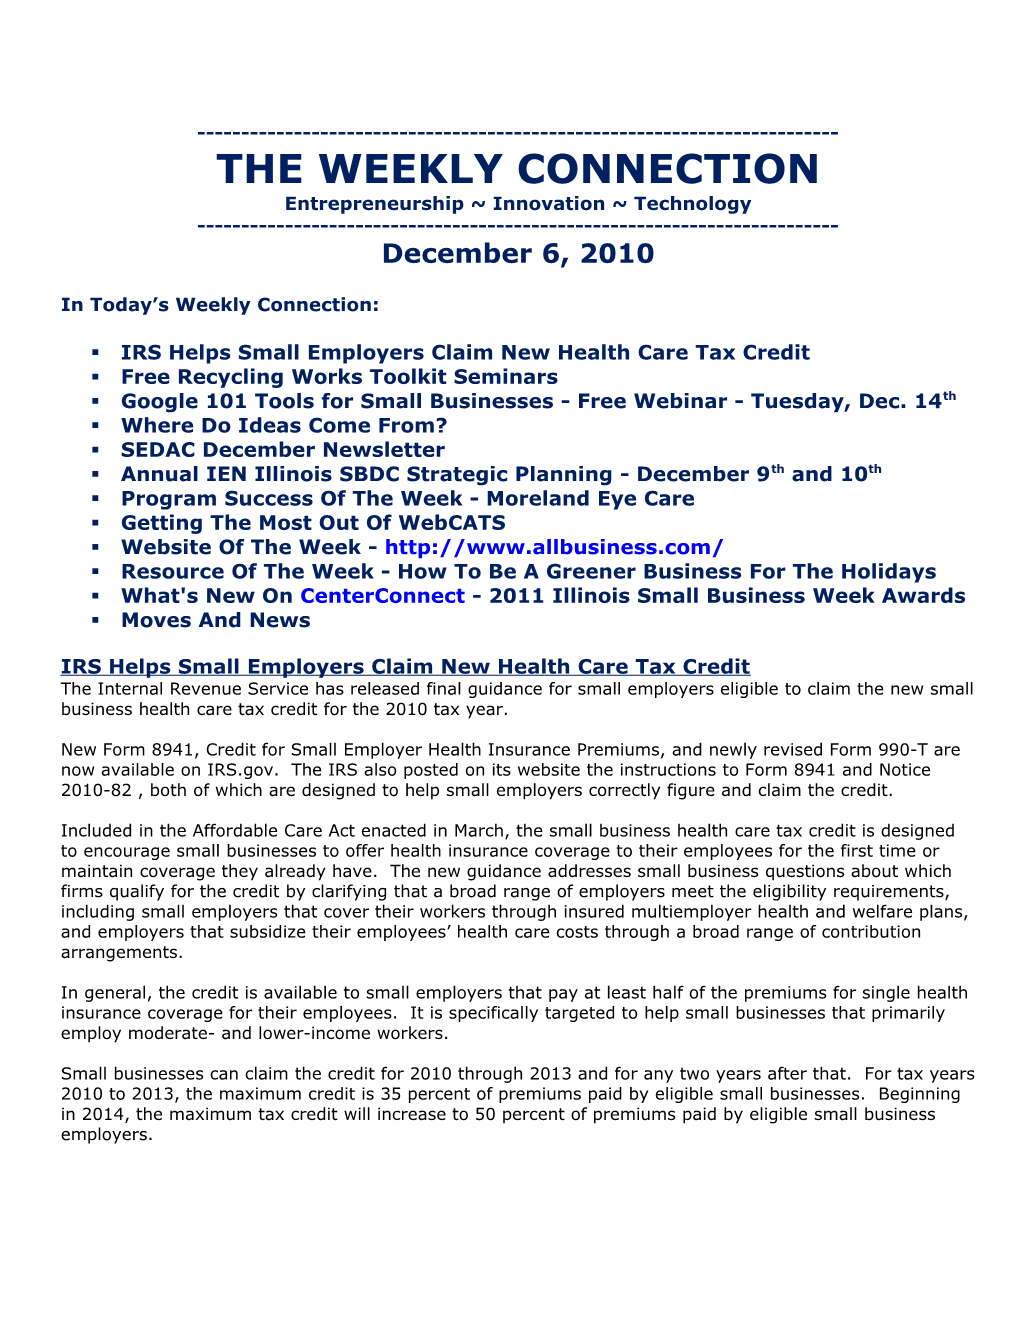 The Weekly Connection s5